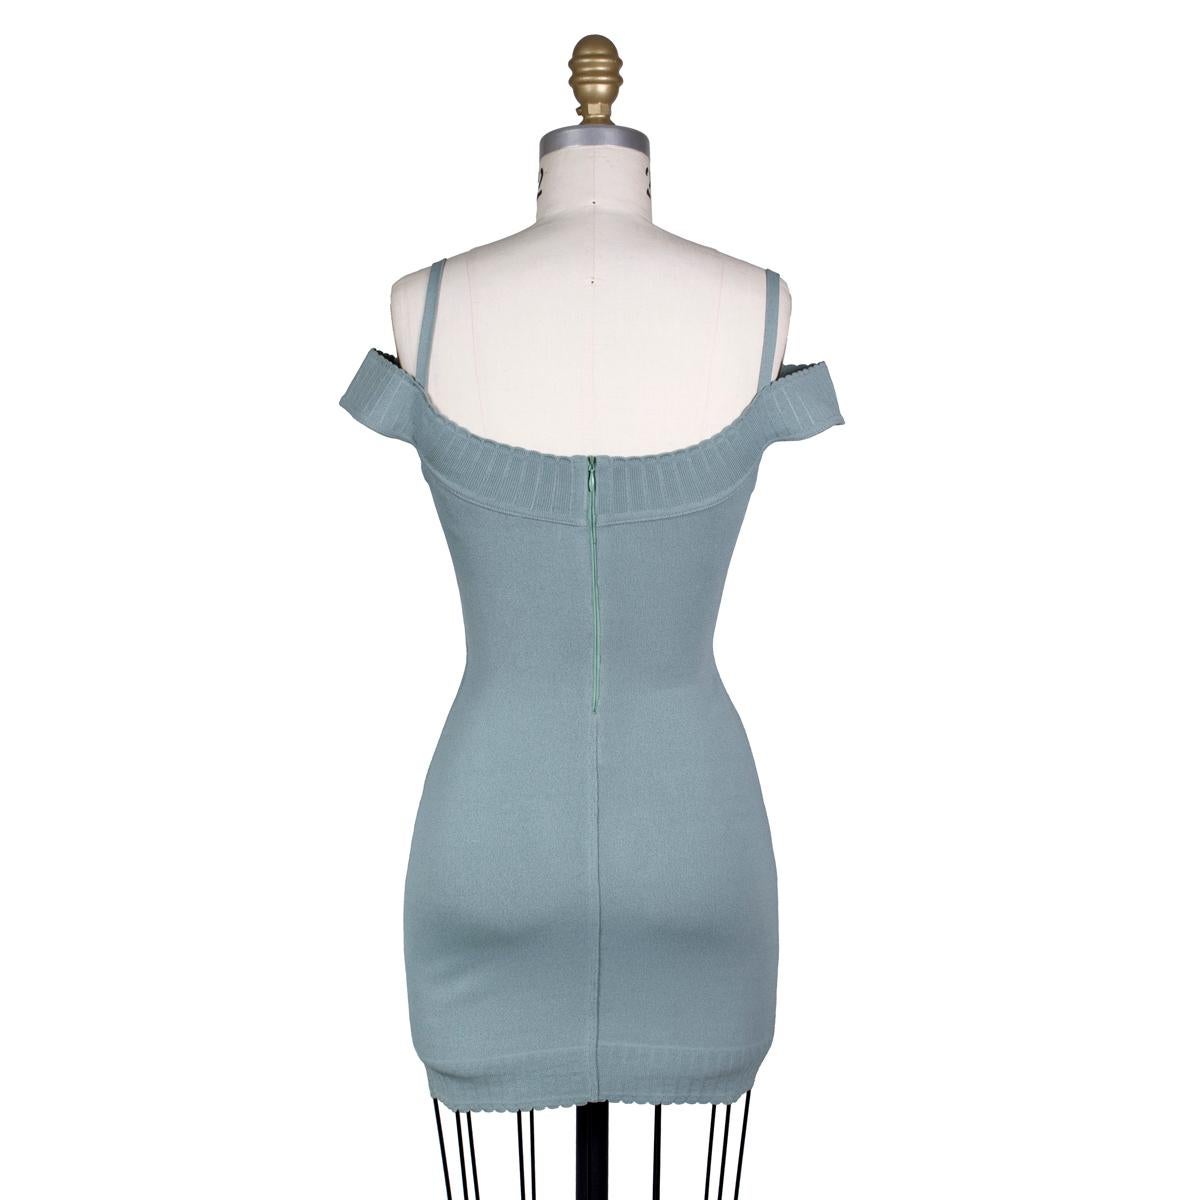 
Dress by Azzedine Alaia
Seafoam green stretch knit
Off shoulder strap detail
Condition: Excellent new with tags, NWT

Size/Measurements:
Labelled size XS (this piece stretches)
23